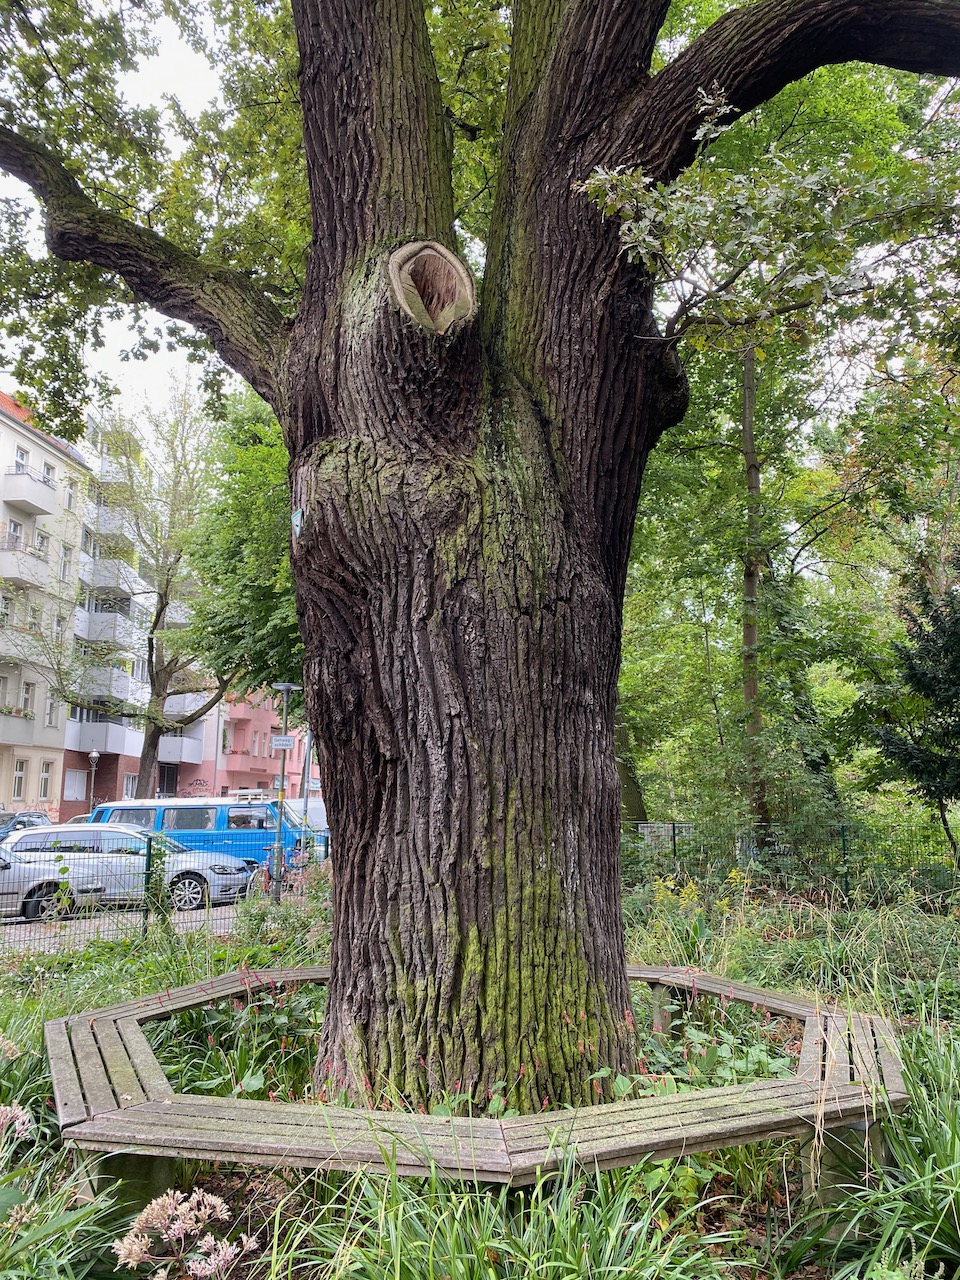 An image of a big oak tree at the south east entrance to Hasenheide park. According to the Giess Den Kiez website, the tree is over 277 years old!